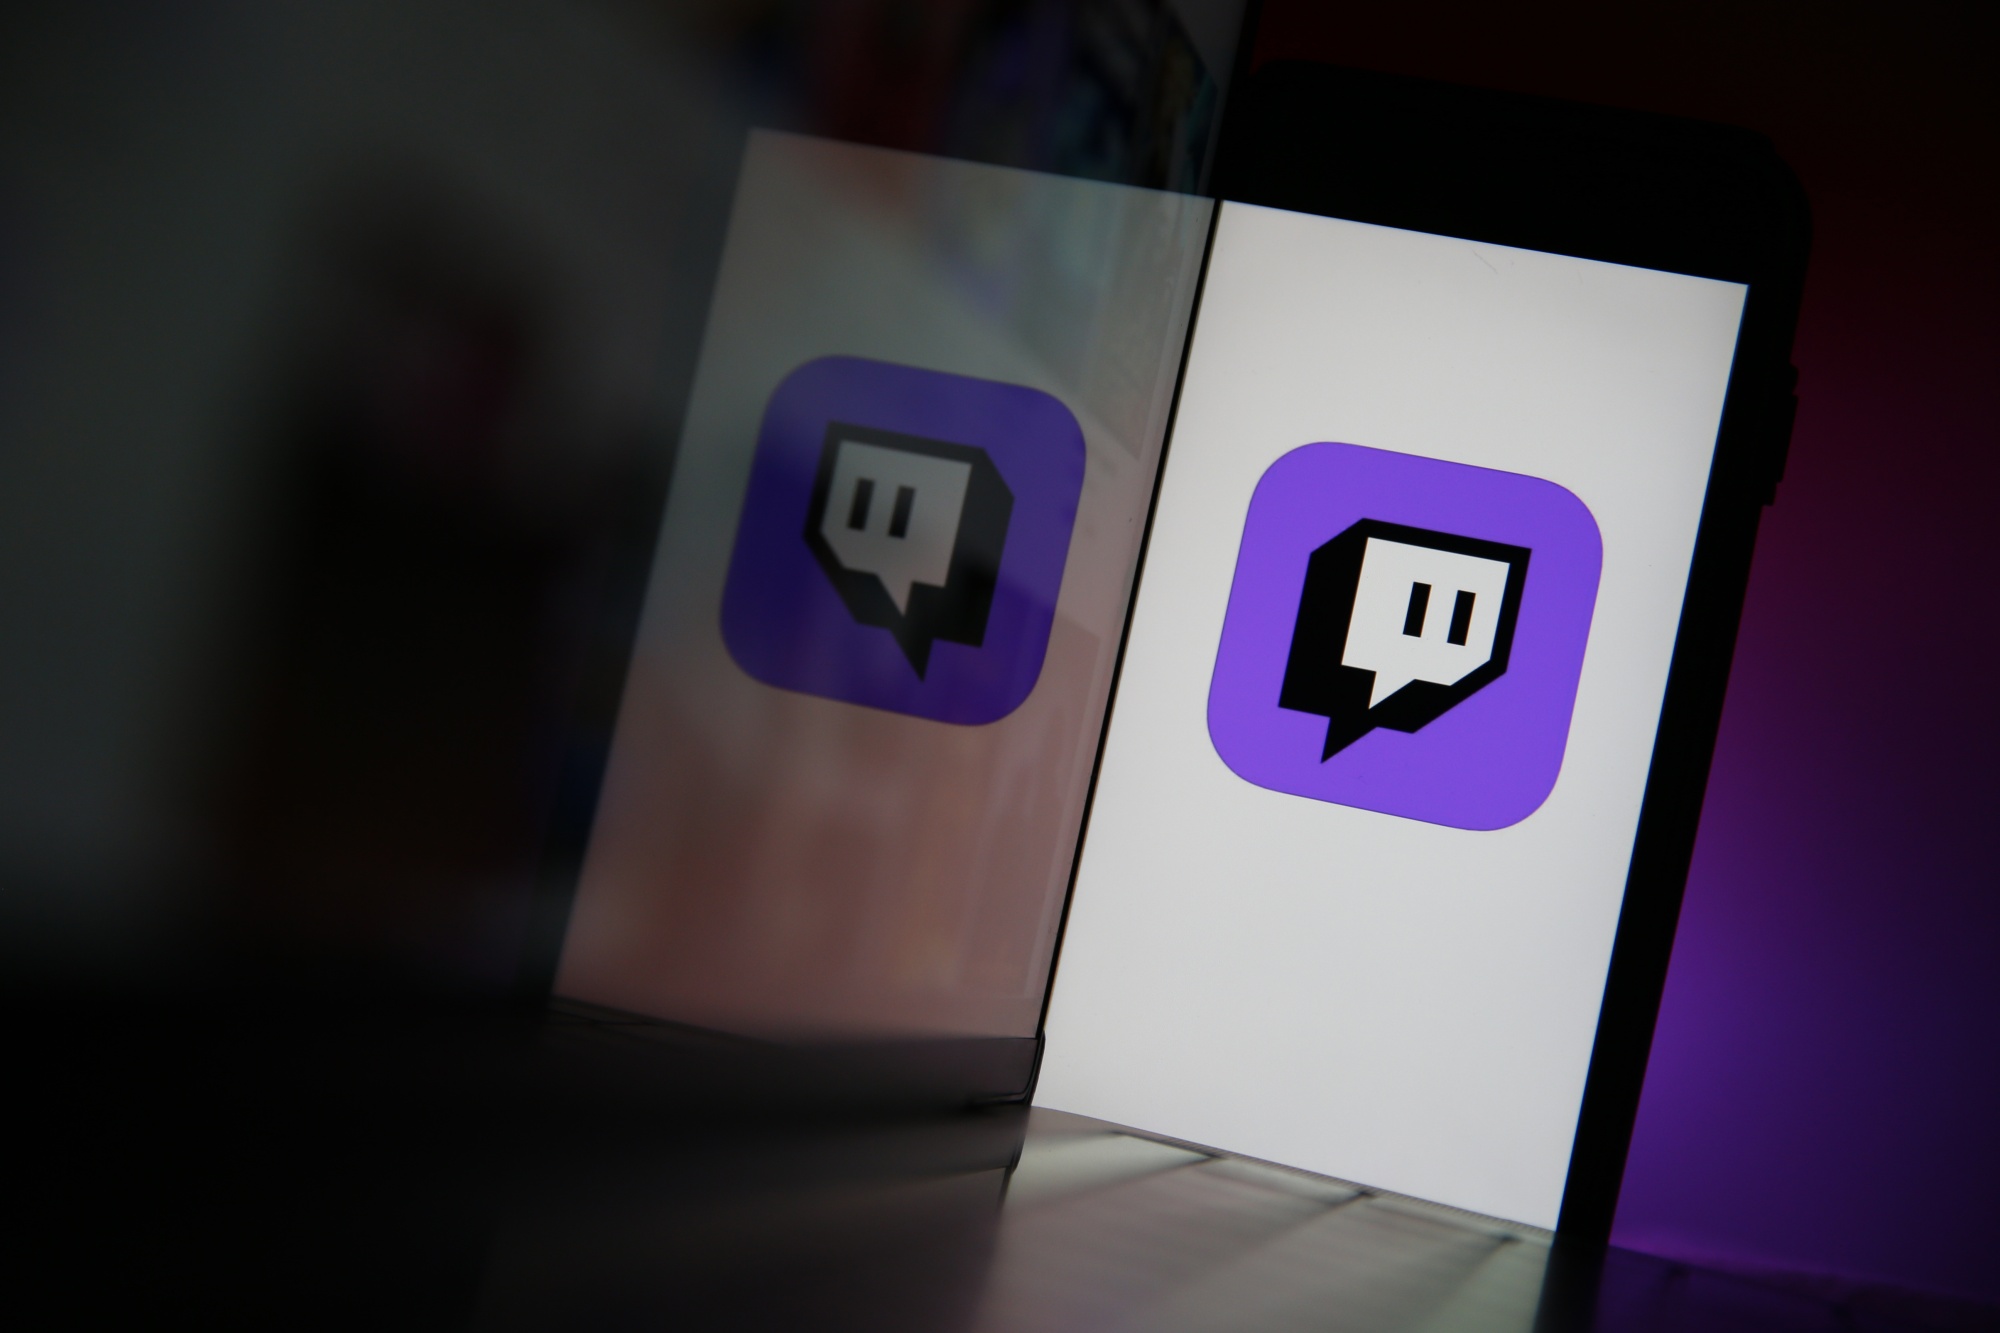 Report: Google to acquire Twitch.tv for more than $1 billion